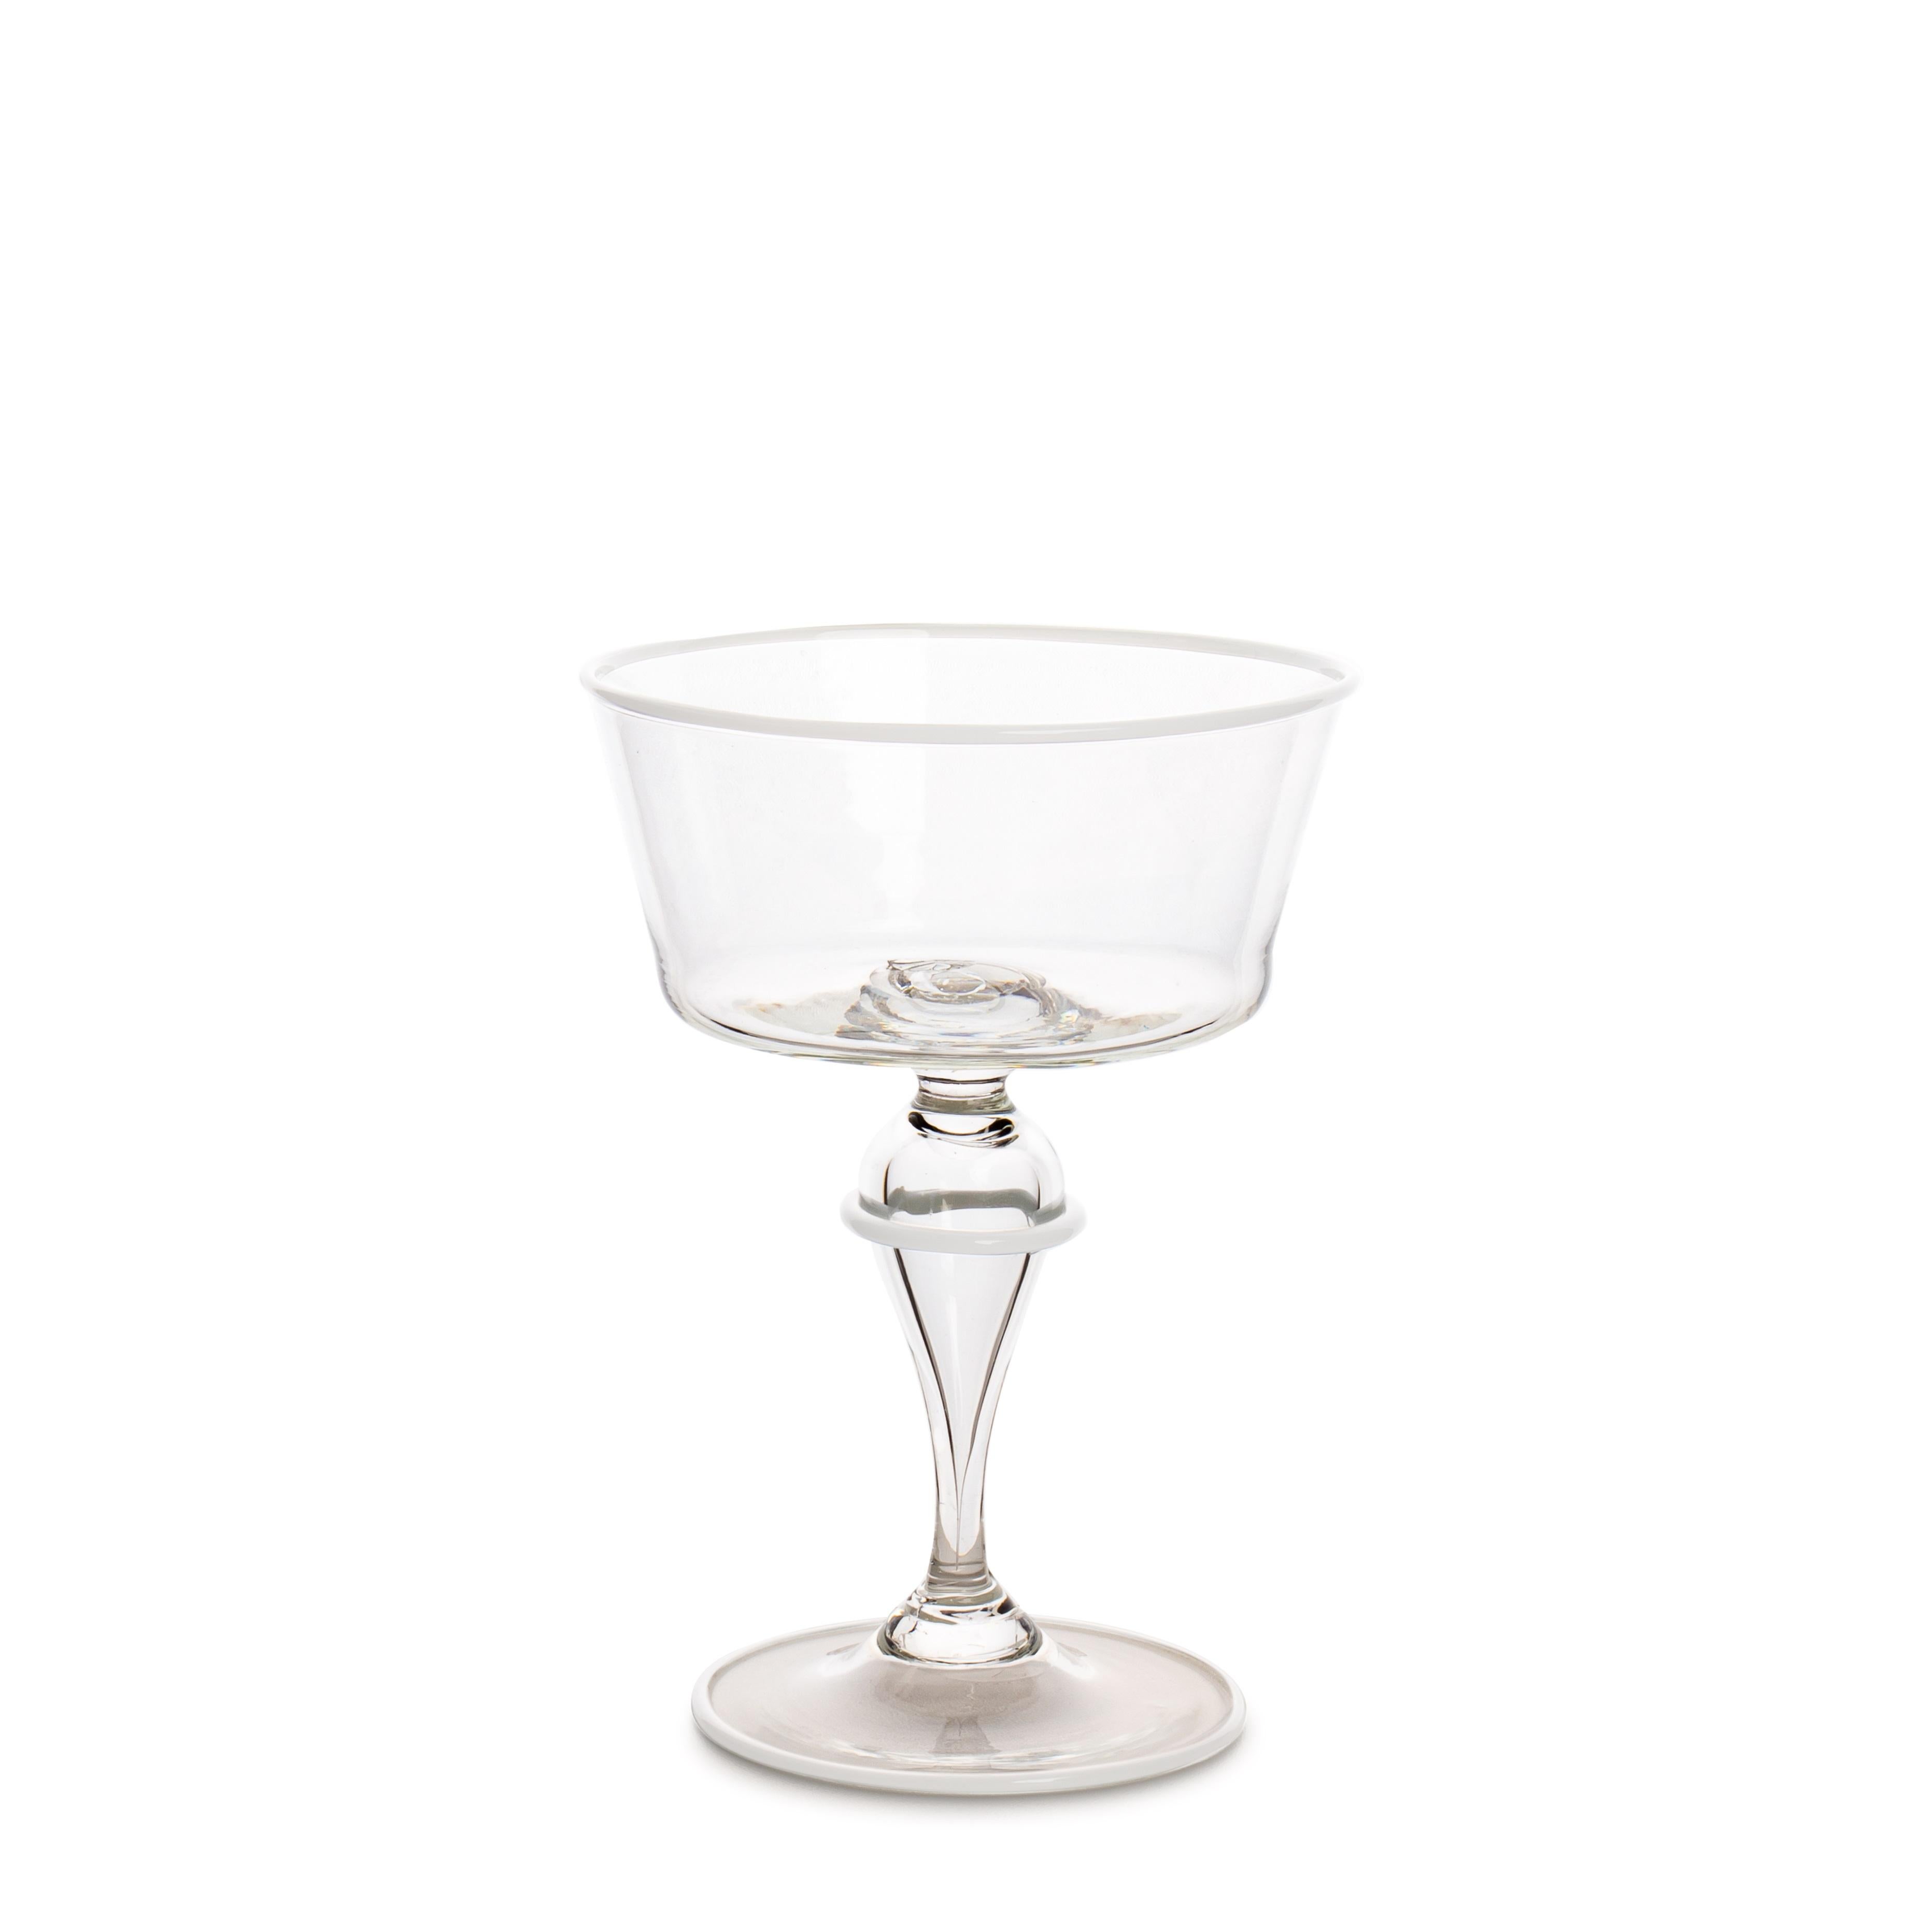 This collection was born from our meeting with an incredible glass master on the island of Murano in Venice. This Maestro is one of the last specialized only in goblets and tumblers made entirely by mouth and hand. No molds are used and the parts of